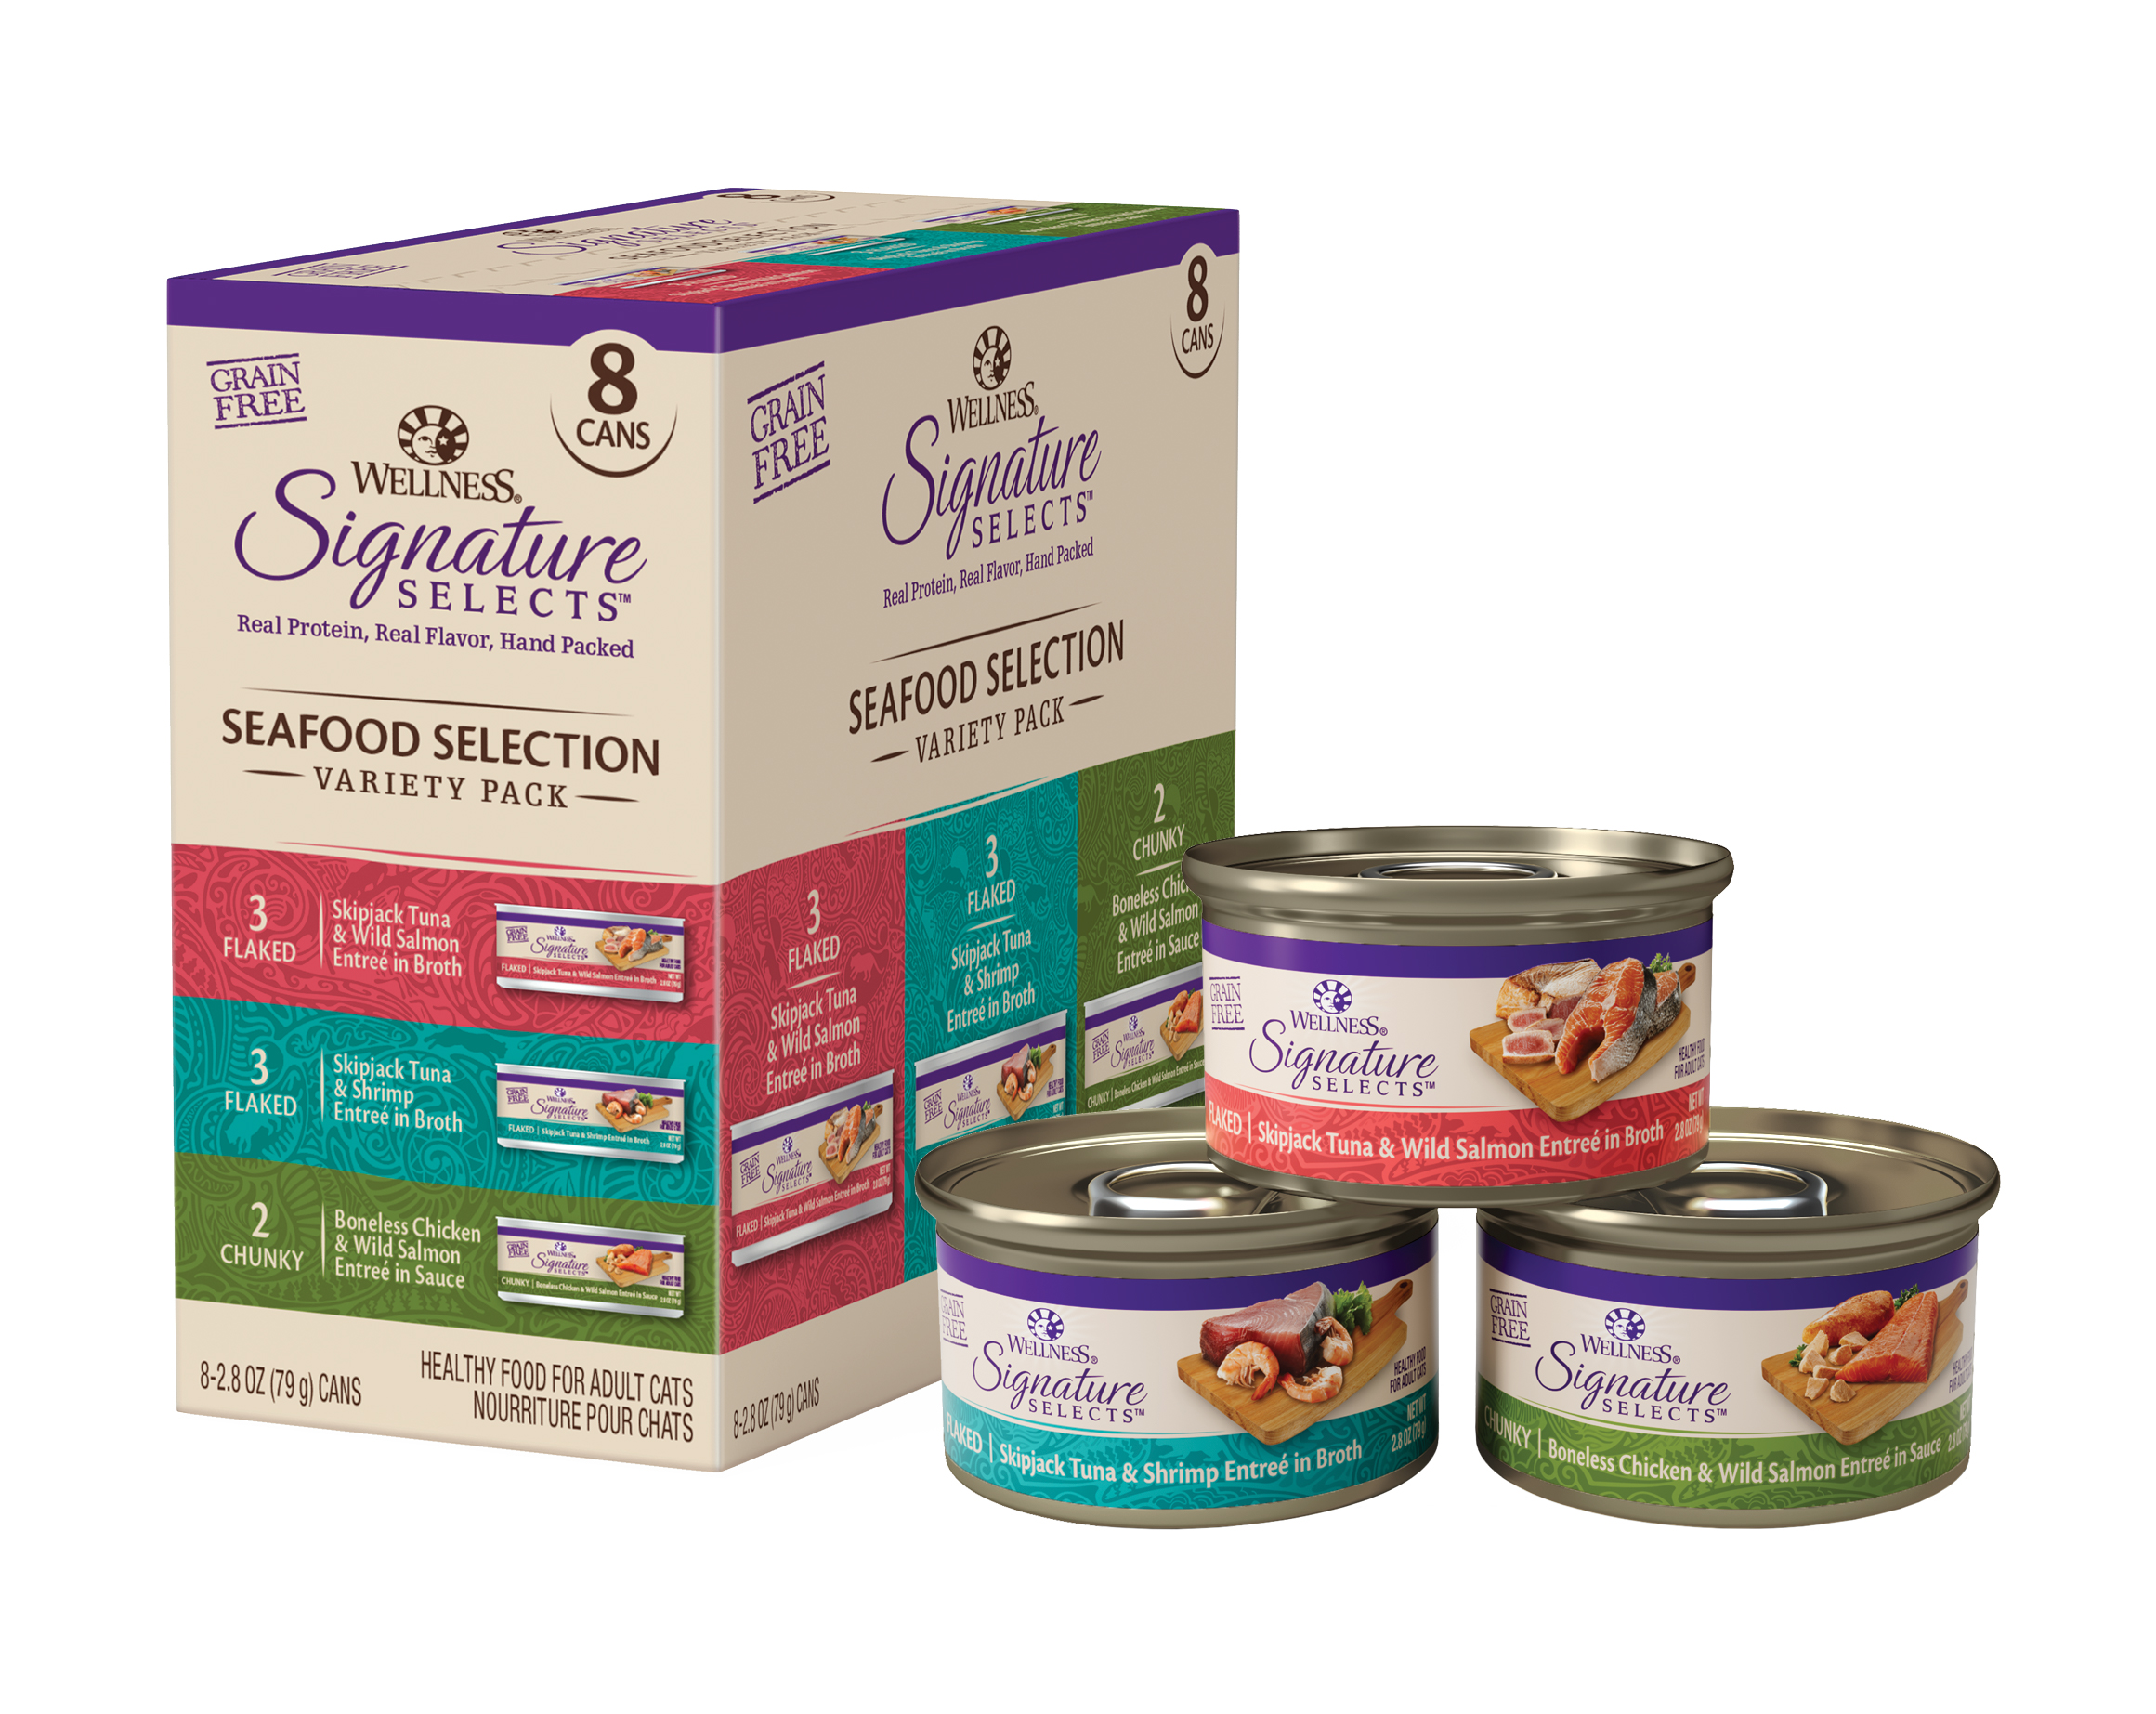 Wellness CORE Signature Selects Variety Pack Seafood Variety Pack